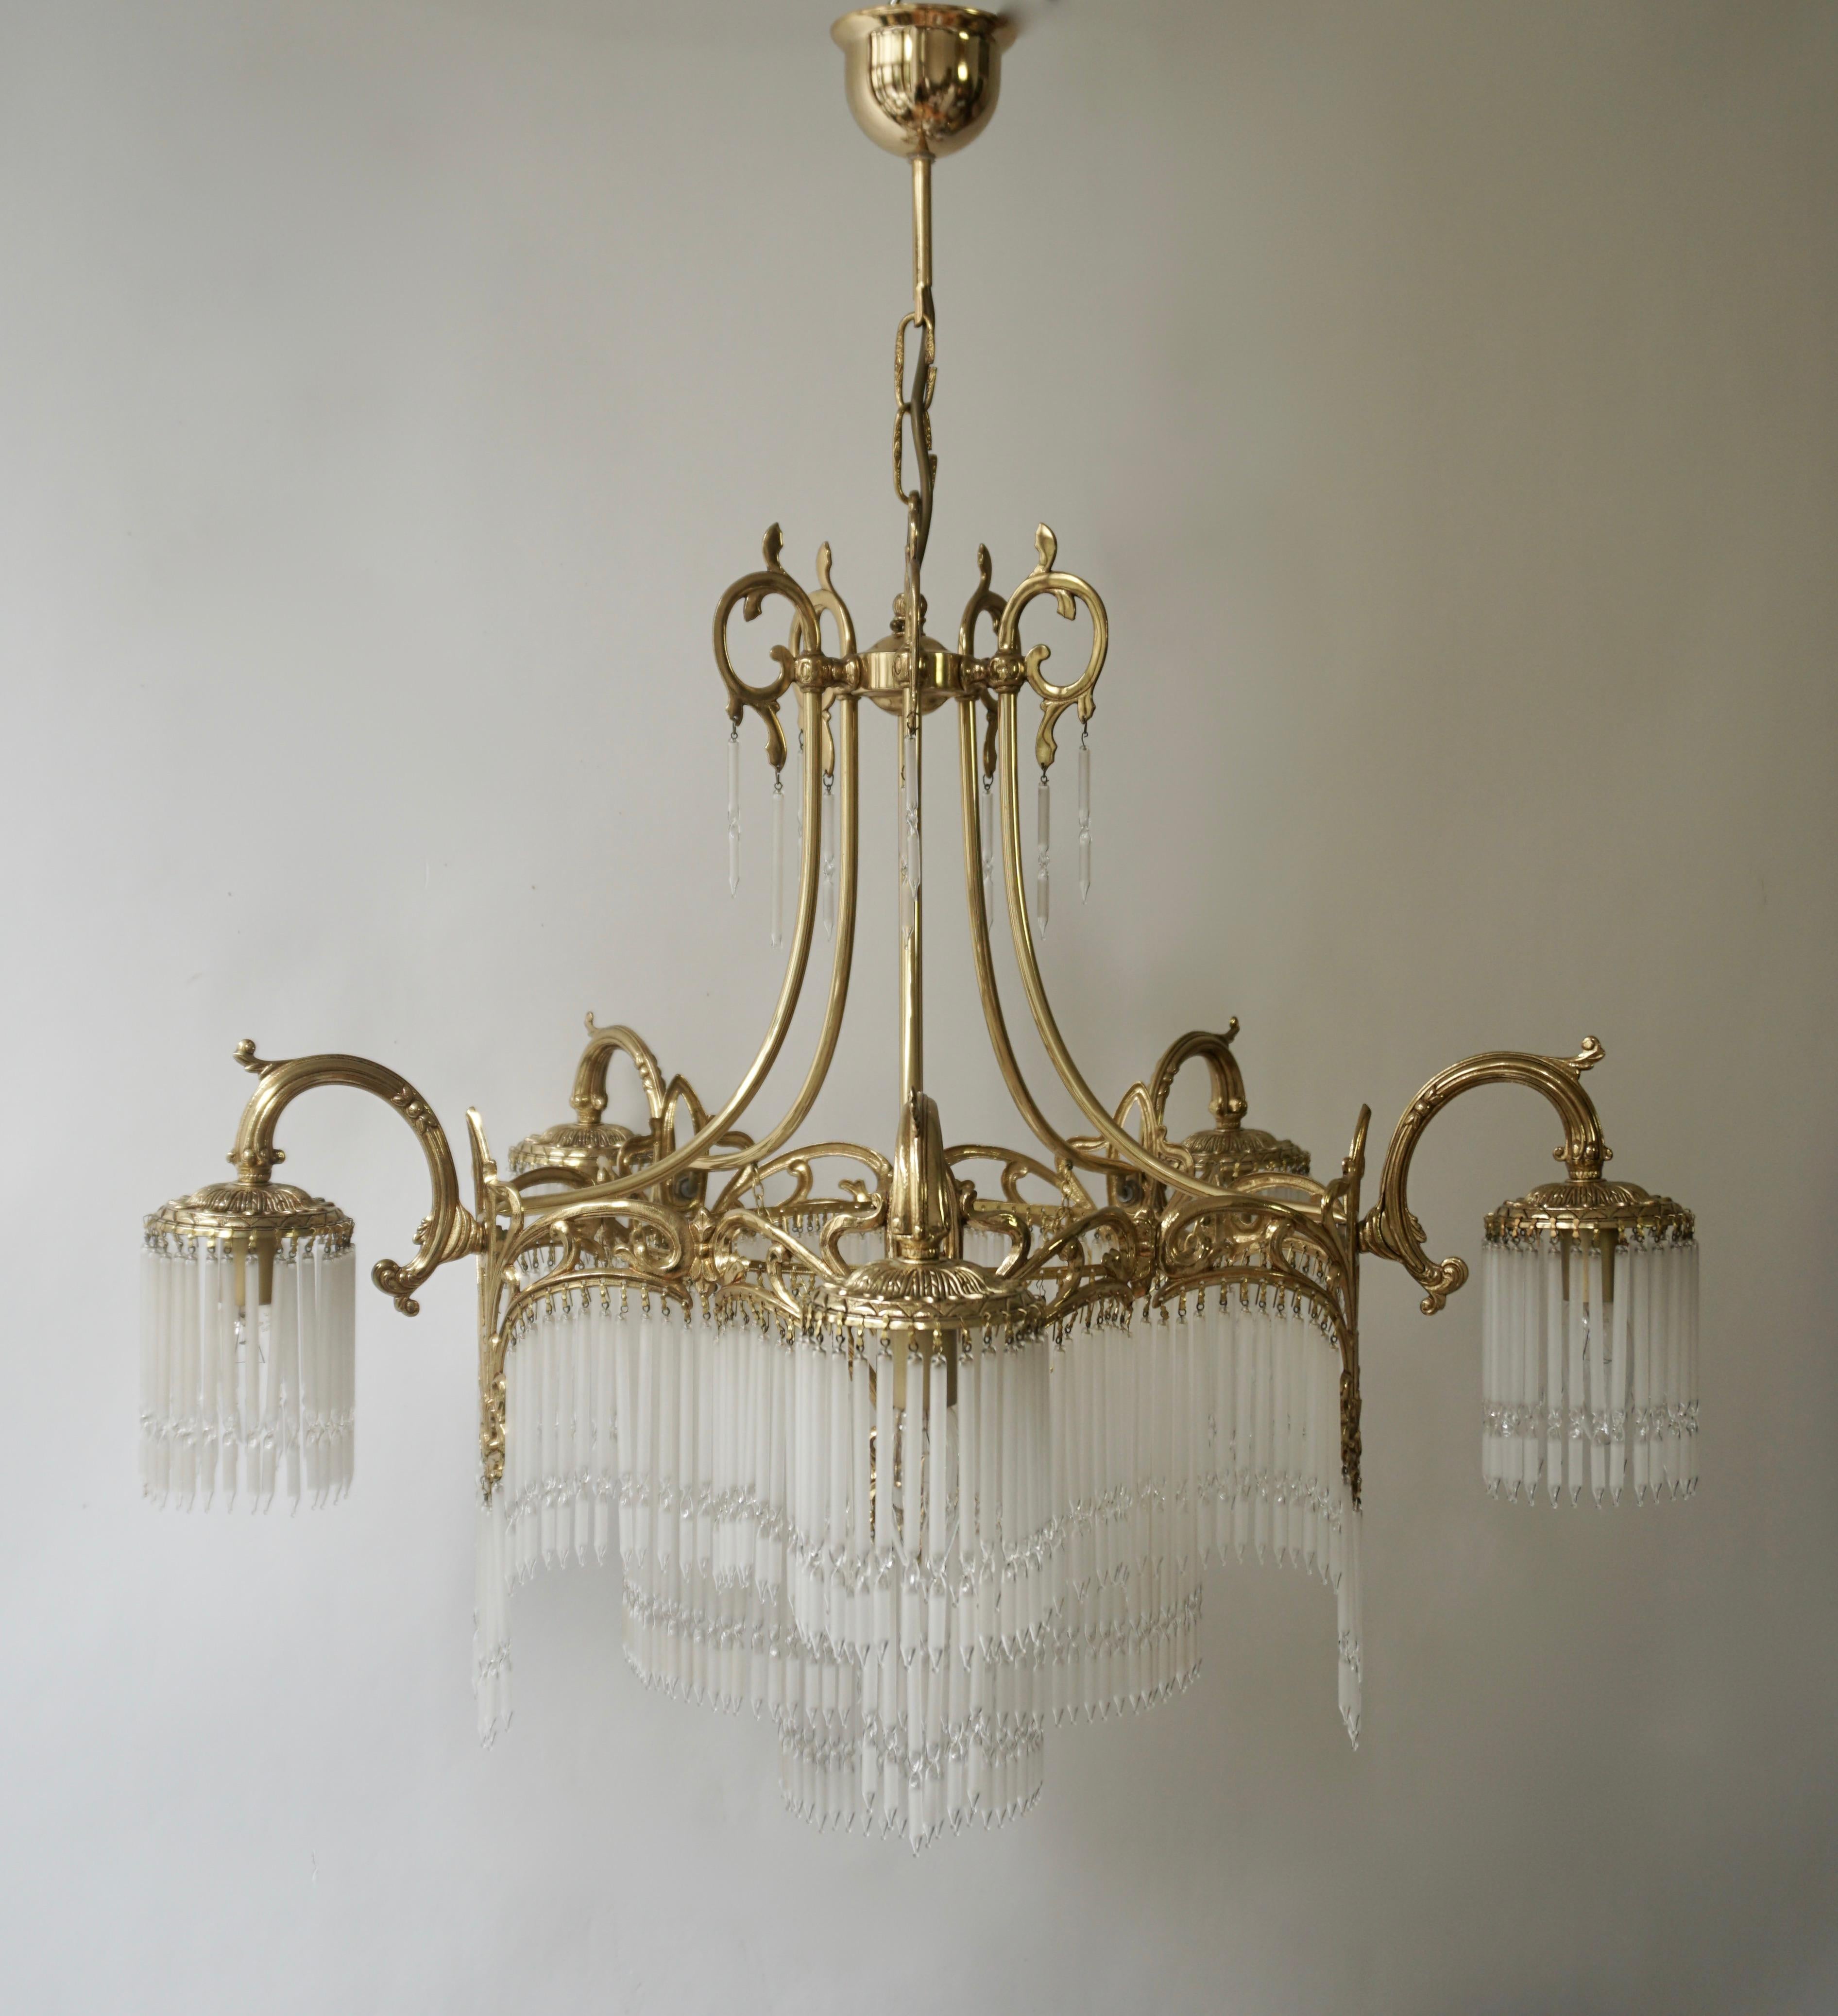 20th Century Large French Art Nouveau & Art Deco Brass and Glass Rods Chandelier